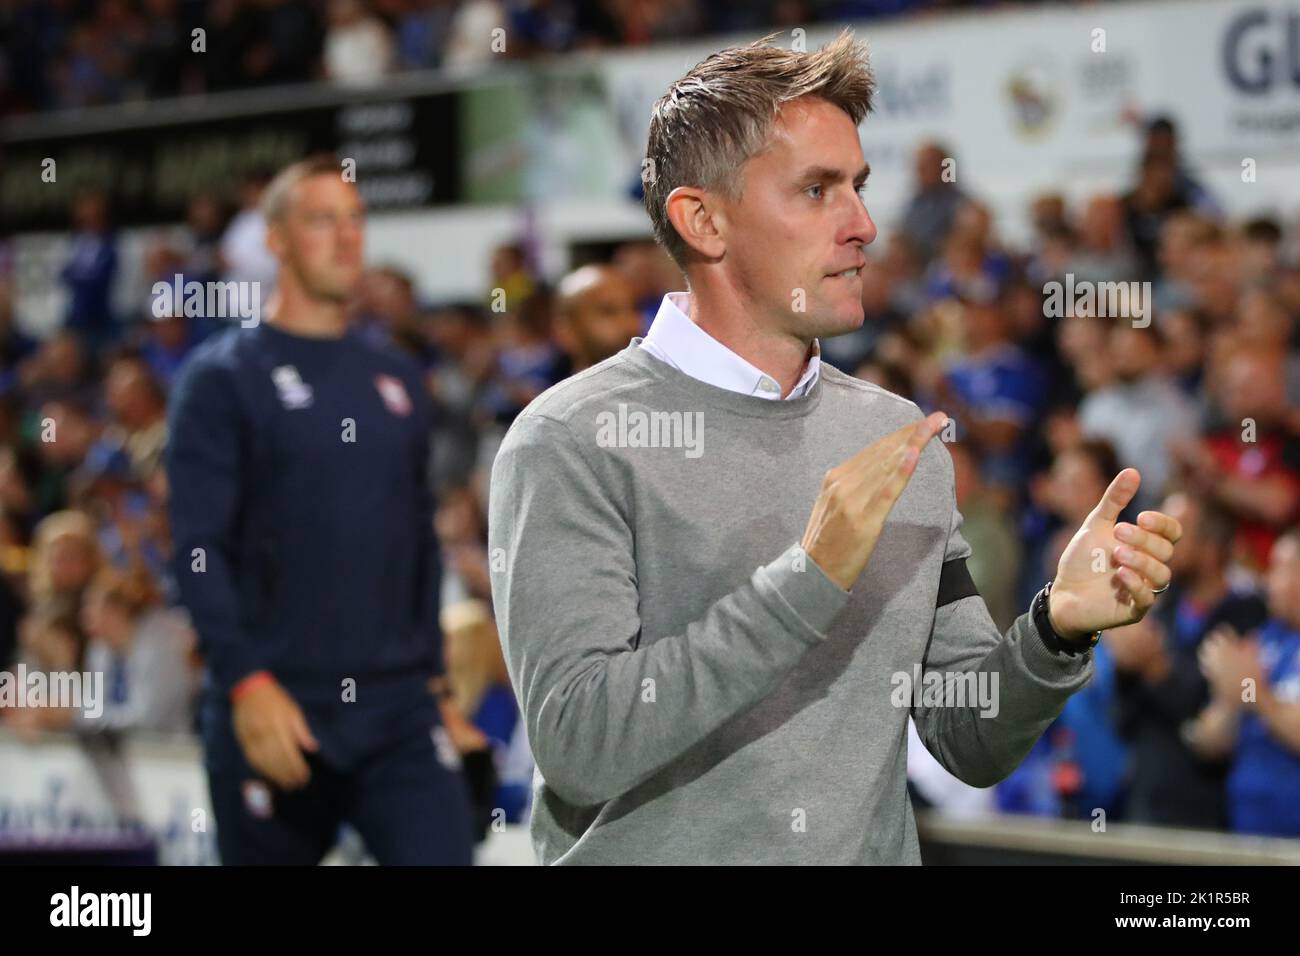 Manager of Ipswich Town, Kieran McKenna - Ipswich Town v Bristol Rovers, Sky Bet League One, Portman Road, Ipswich, UK - 13th September 2022  Editorial Use Only - DataCo restrictions apply Stock Photo